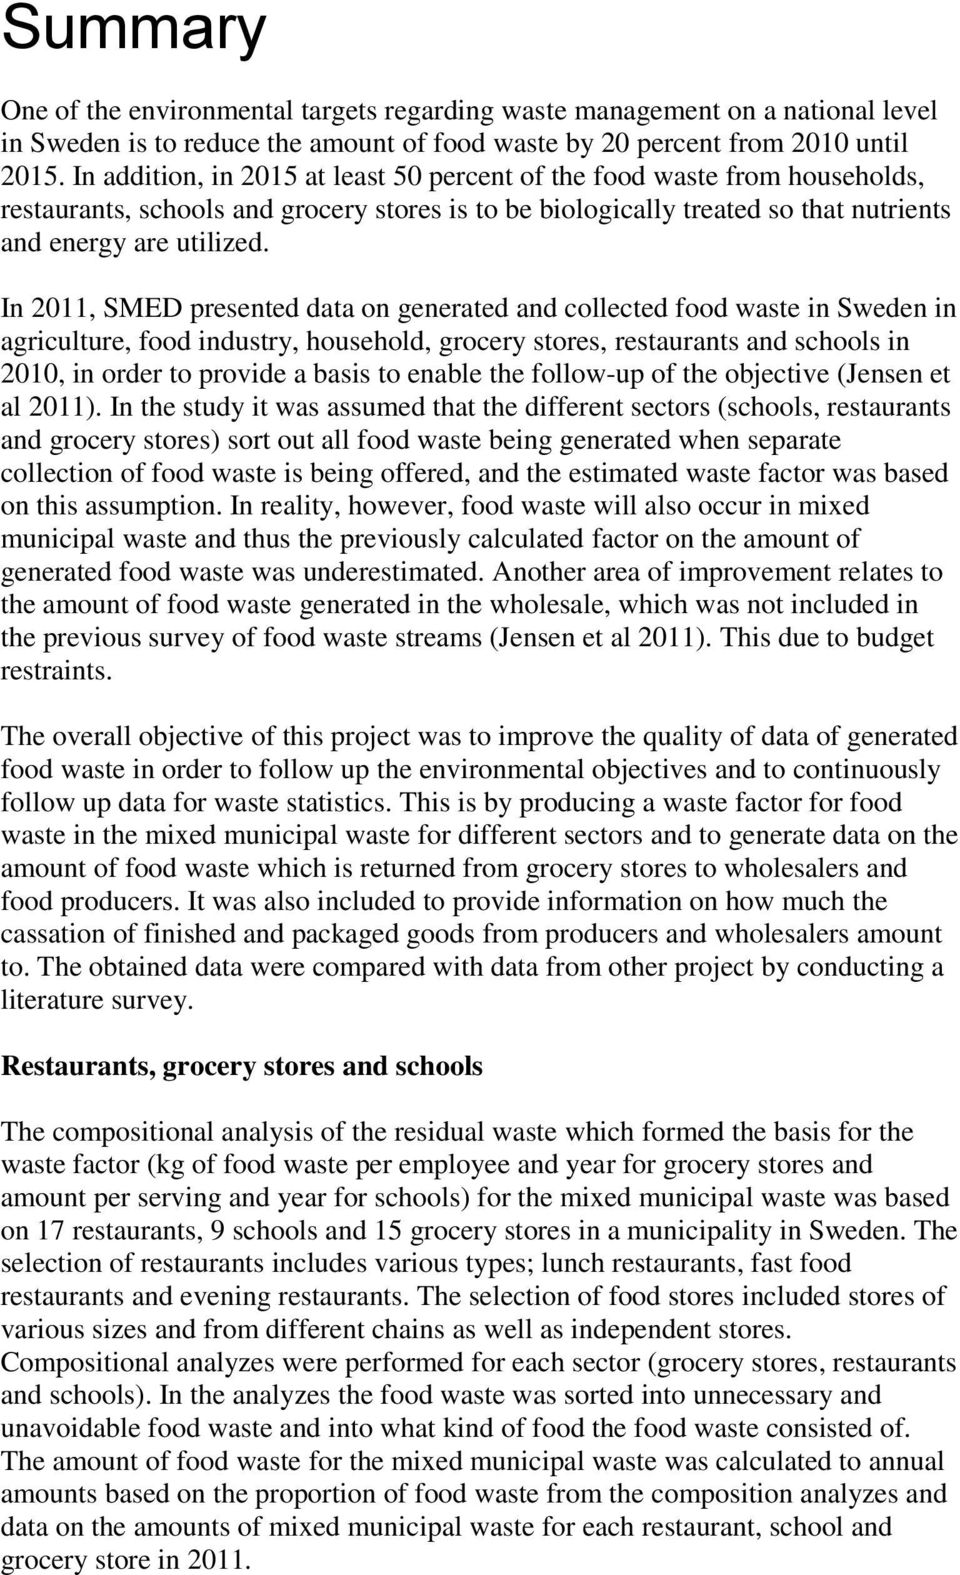 In 2011, SMED presented data on generated and collected food waste in Sweden in agriculture, food industry, household, grocery stores, restaurants and schools in 2010, in order to provide a basis to